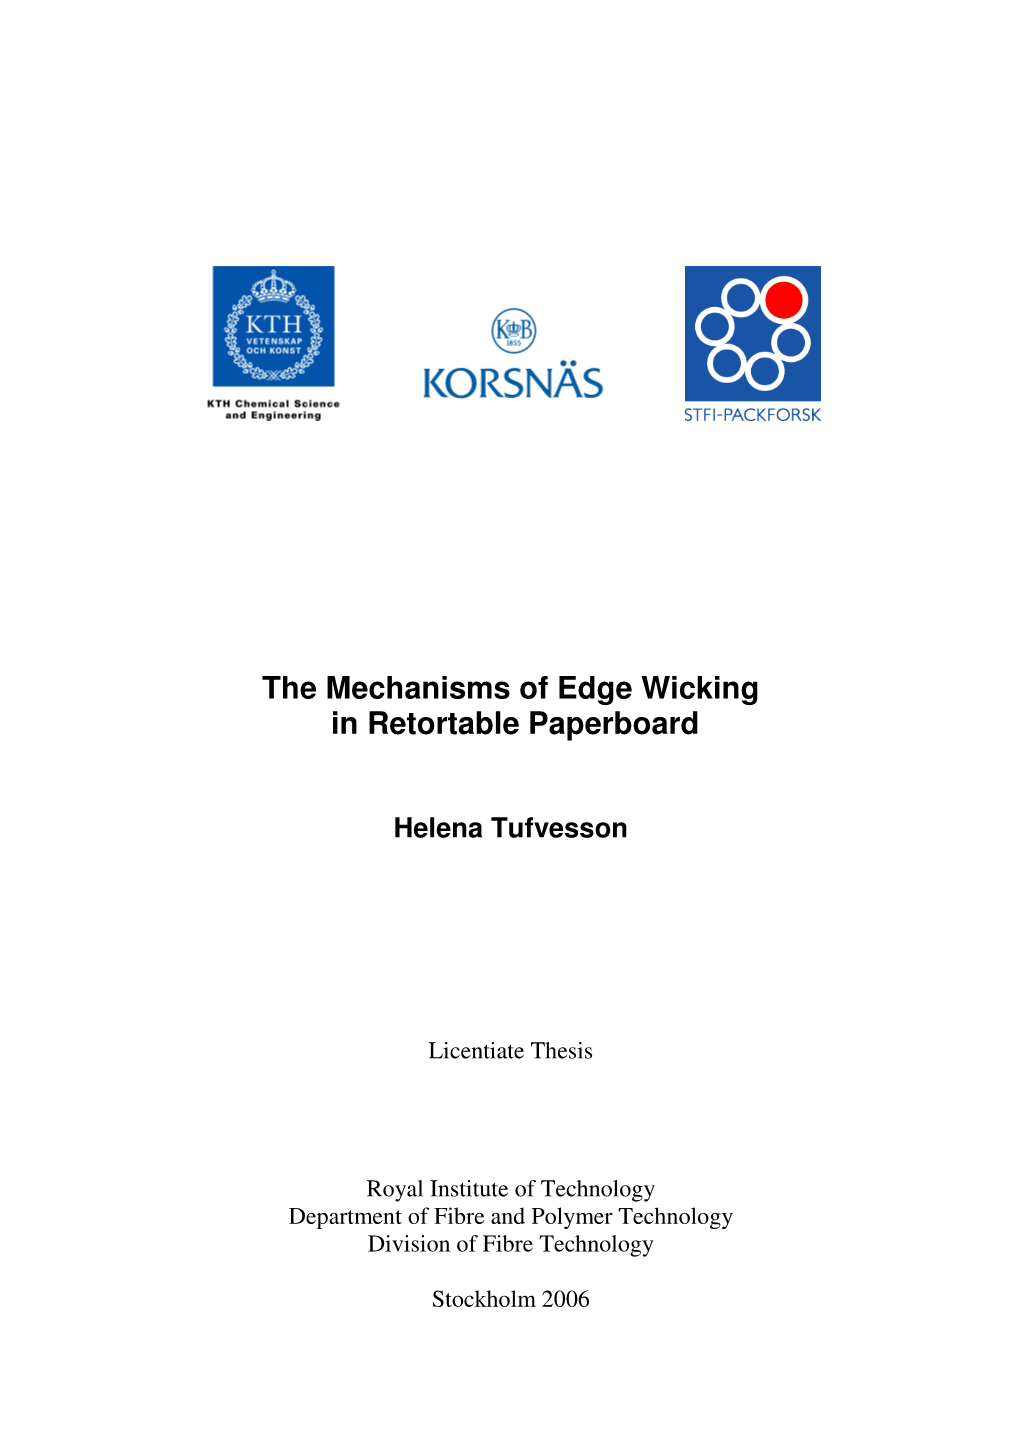 The Mechanisms of Edge Wicking in Retortable Paperboard